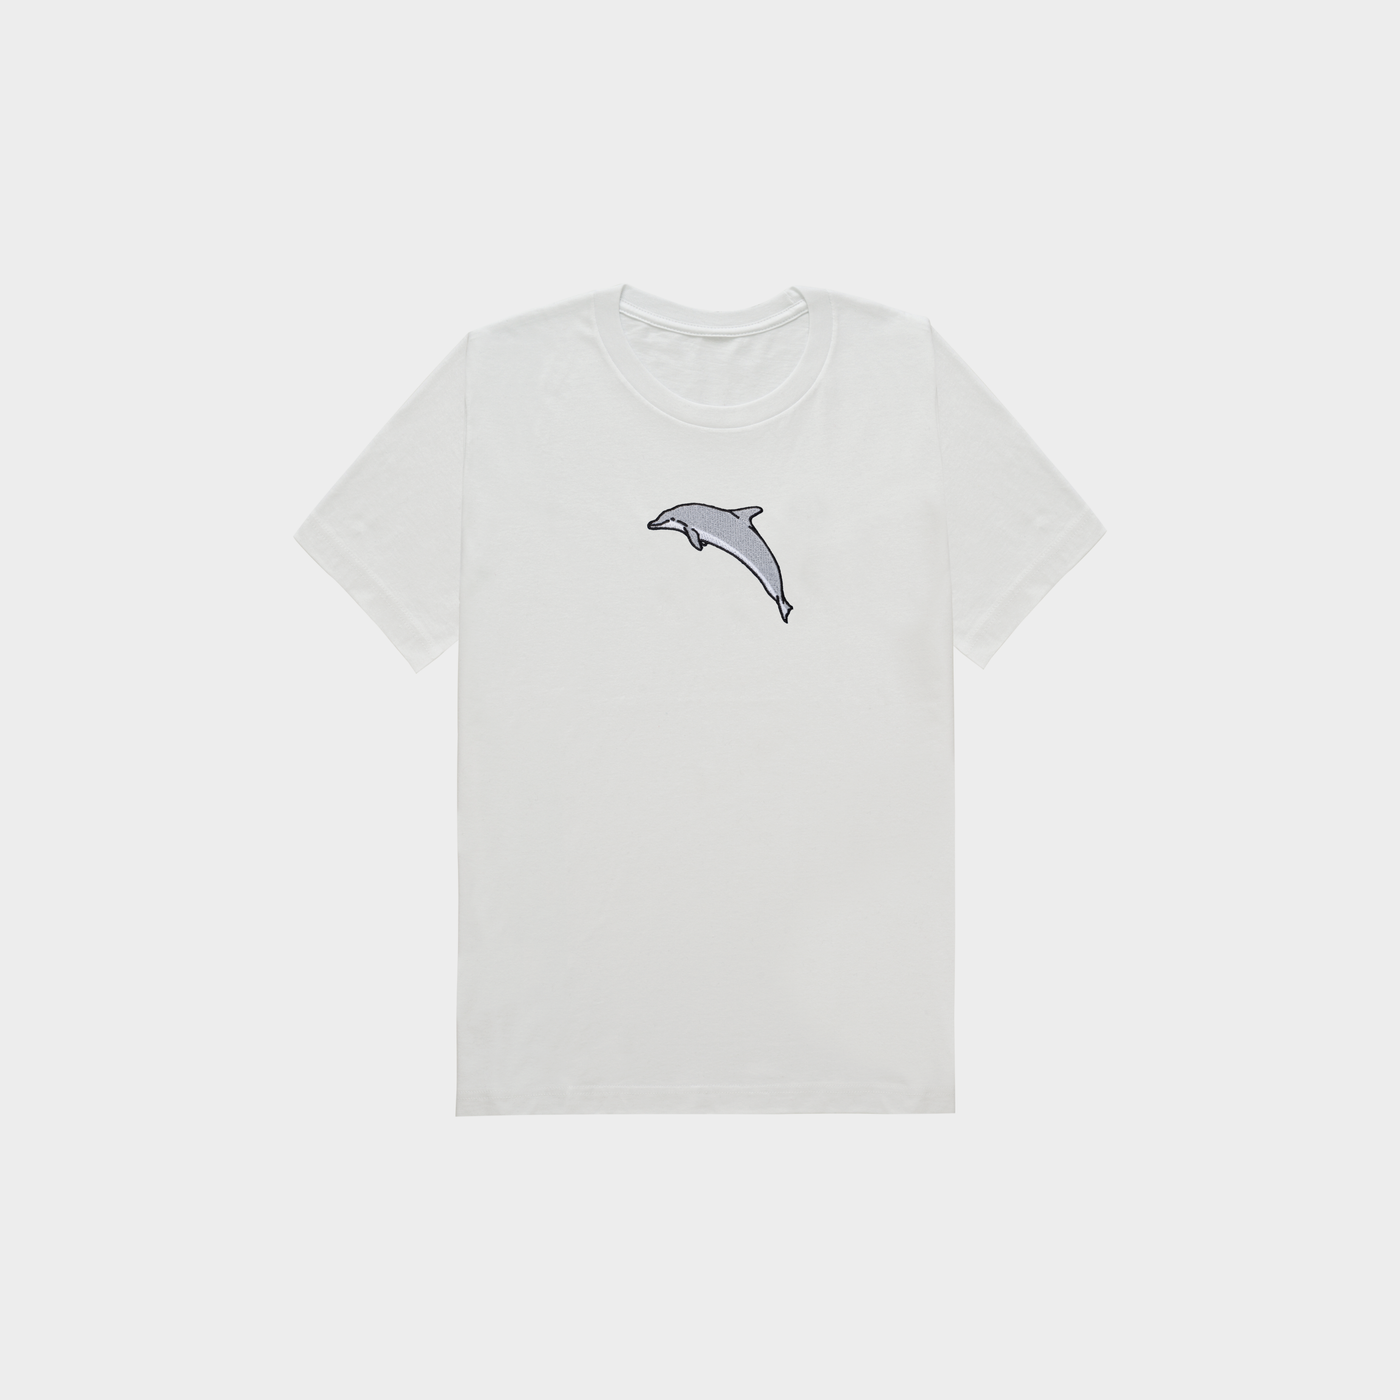 Bobby's Planet Kids Embroidered Dolphin T-Shirt from Seven Seas Fish Animals Collection in White Color#color_white